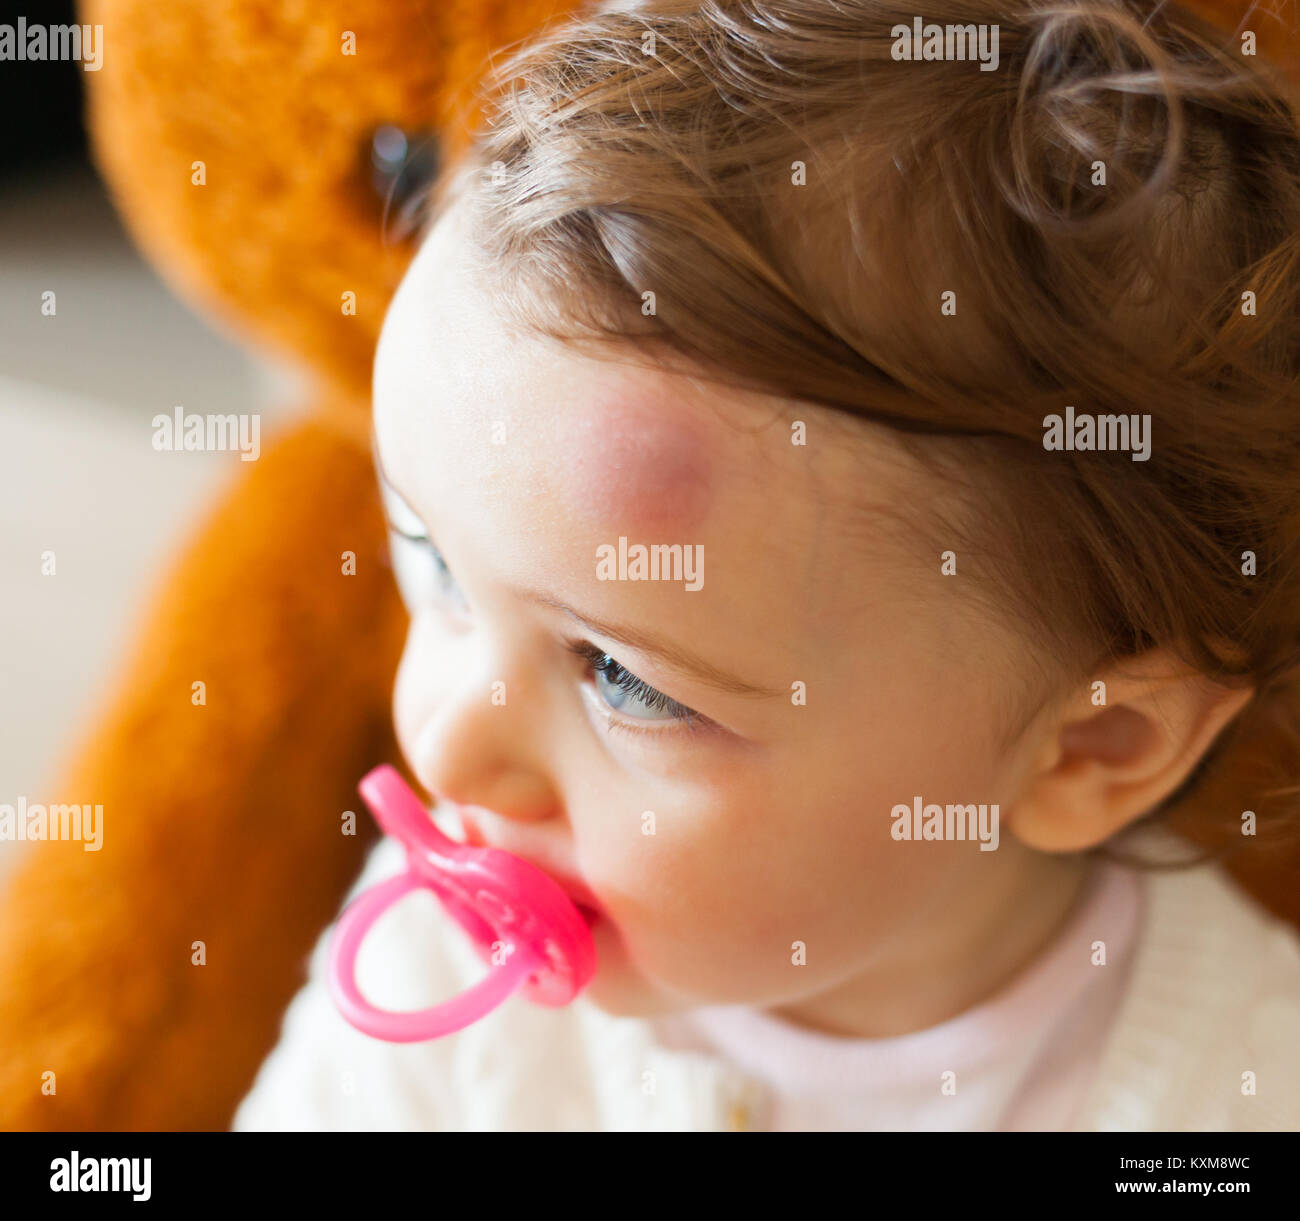 Toddler with big bruise on his forehead after bumping. Children often accidentally bump their heads. Stock Photo